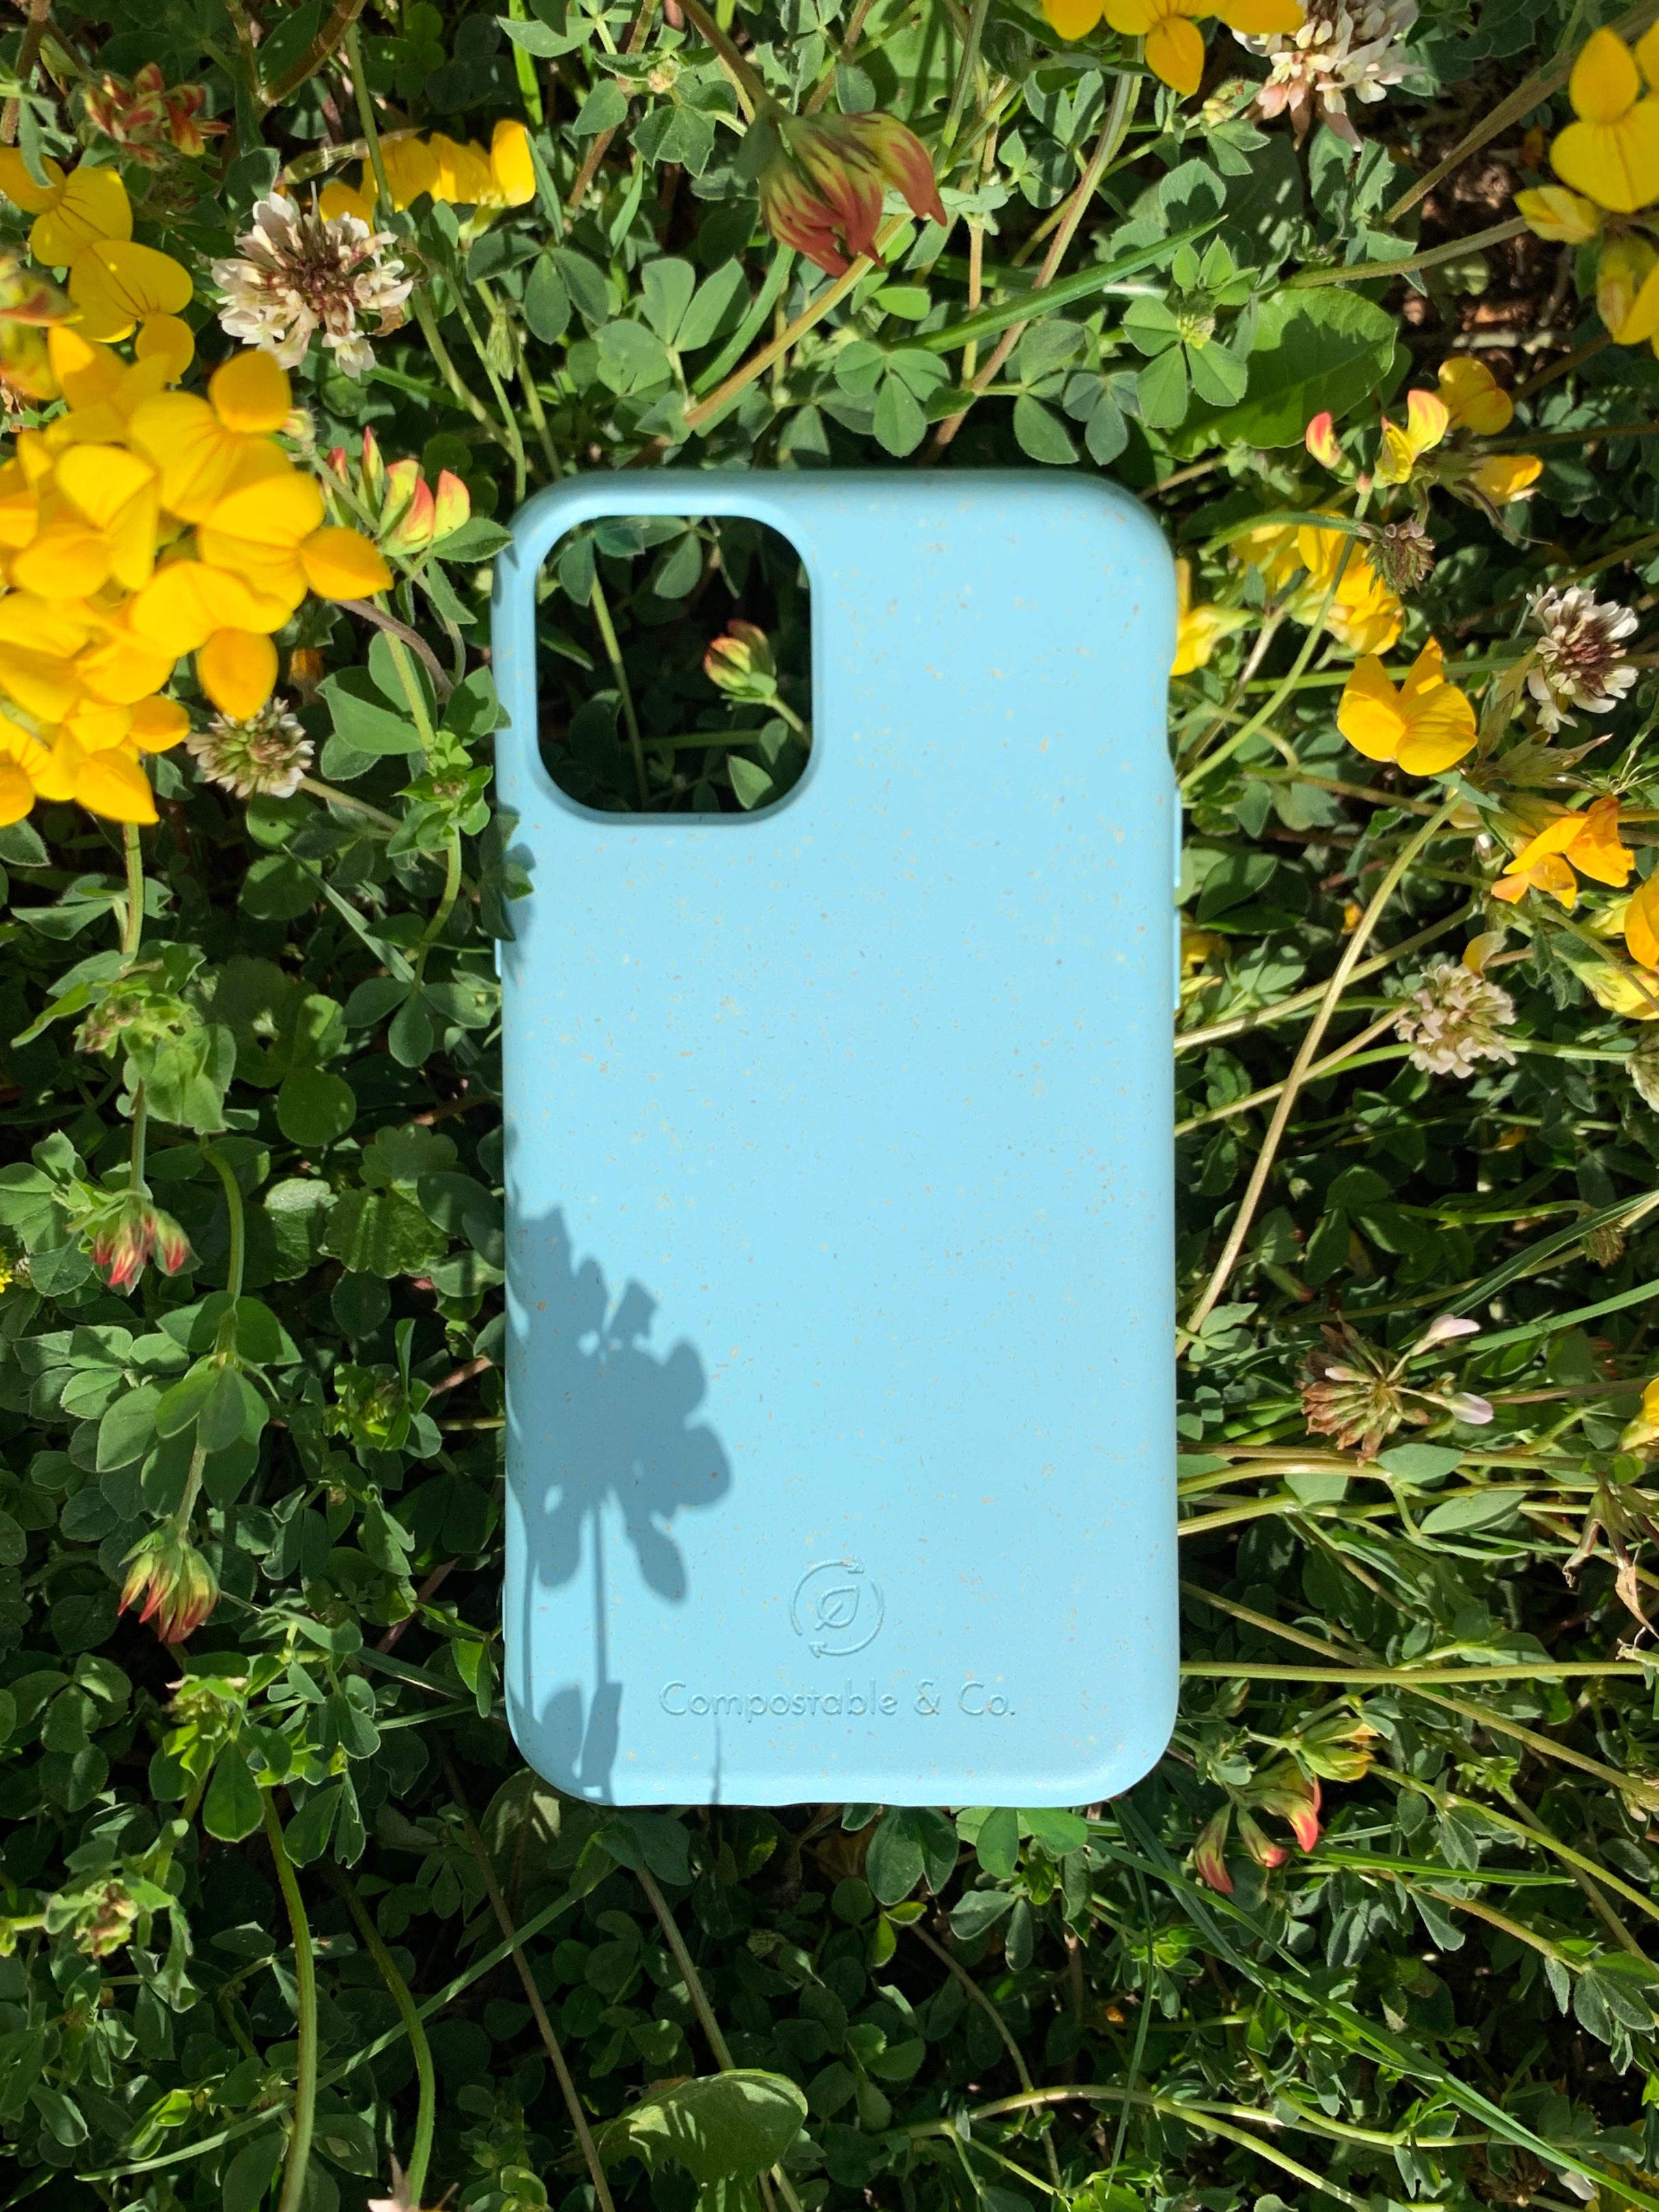 Compostable & Co. iPhone 12 pro max blue biodegradable phone case in nature